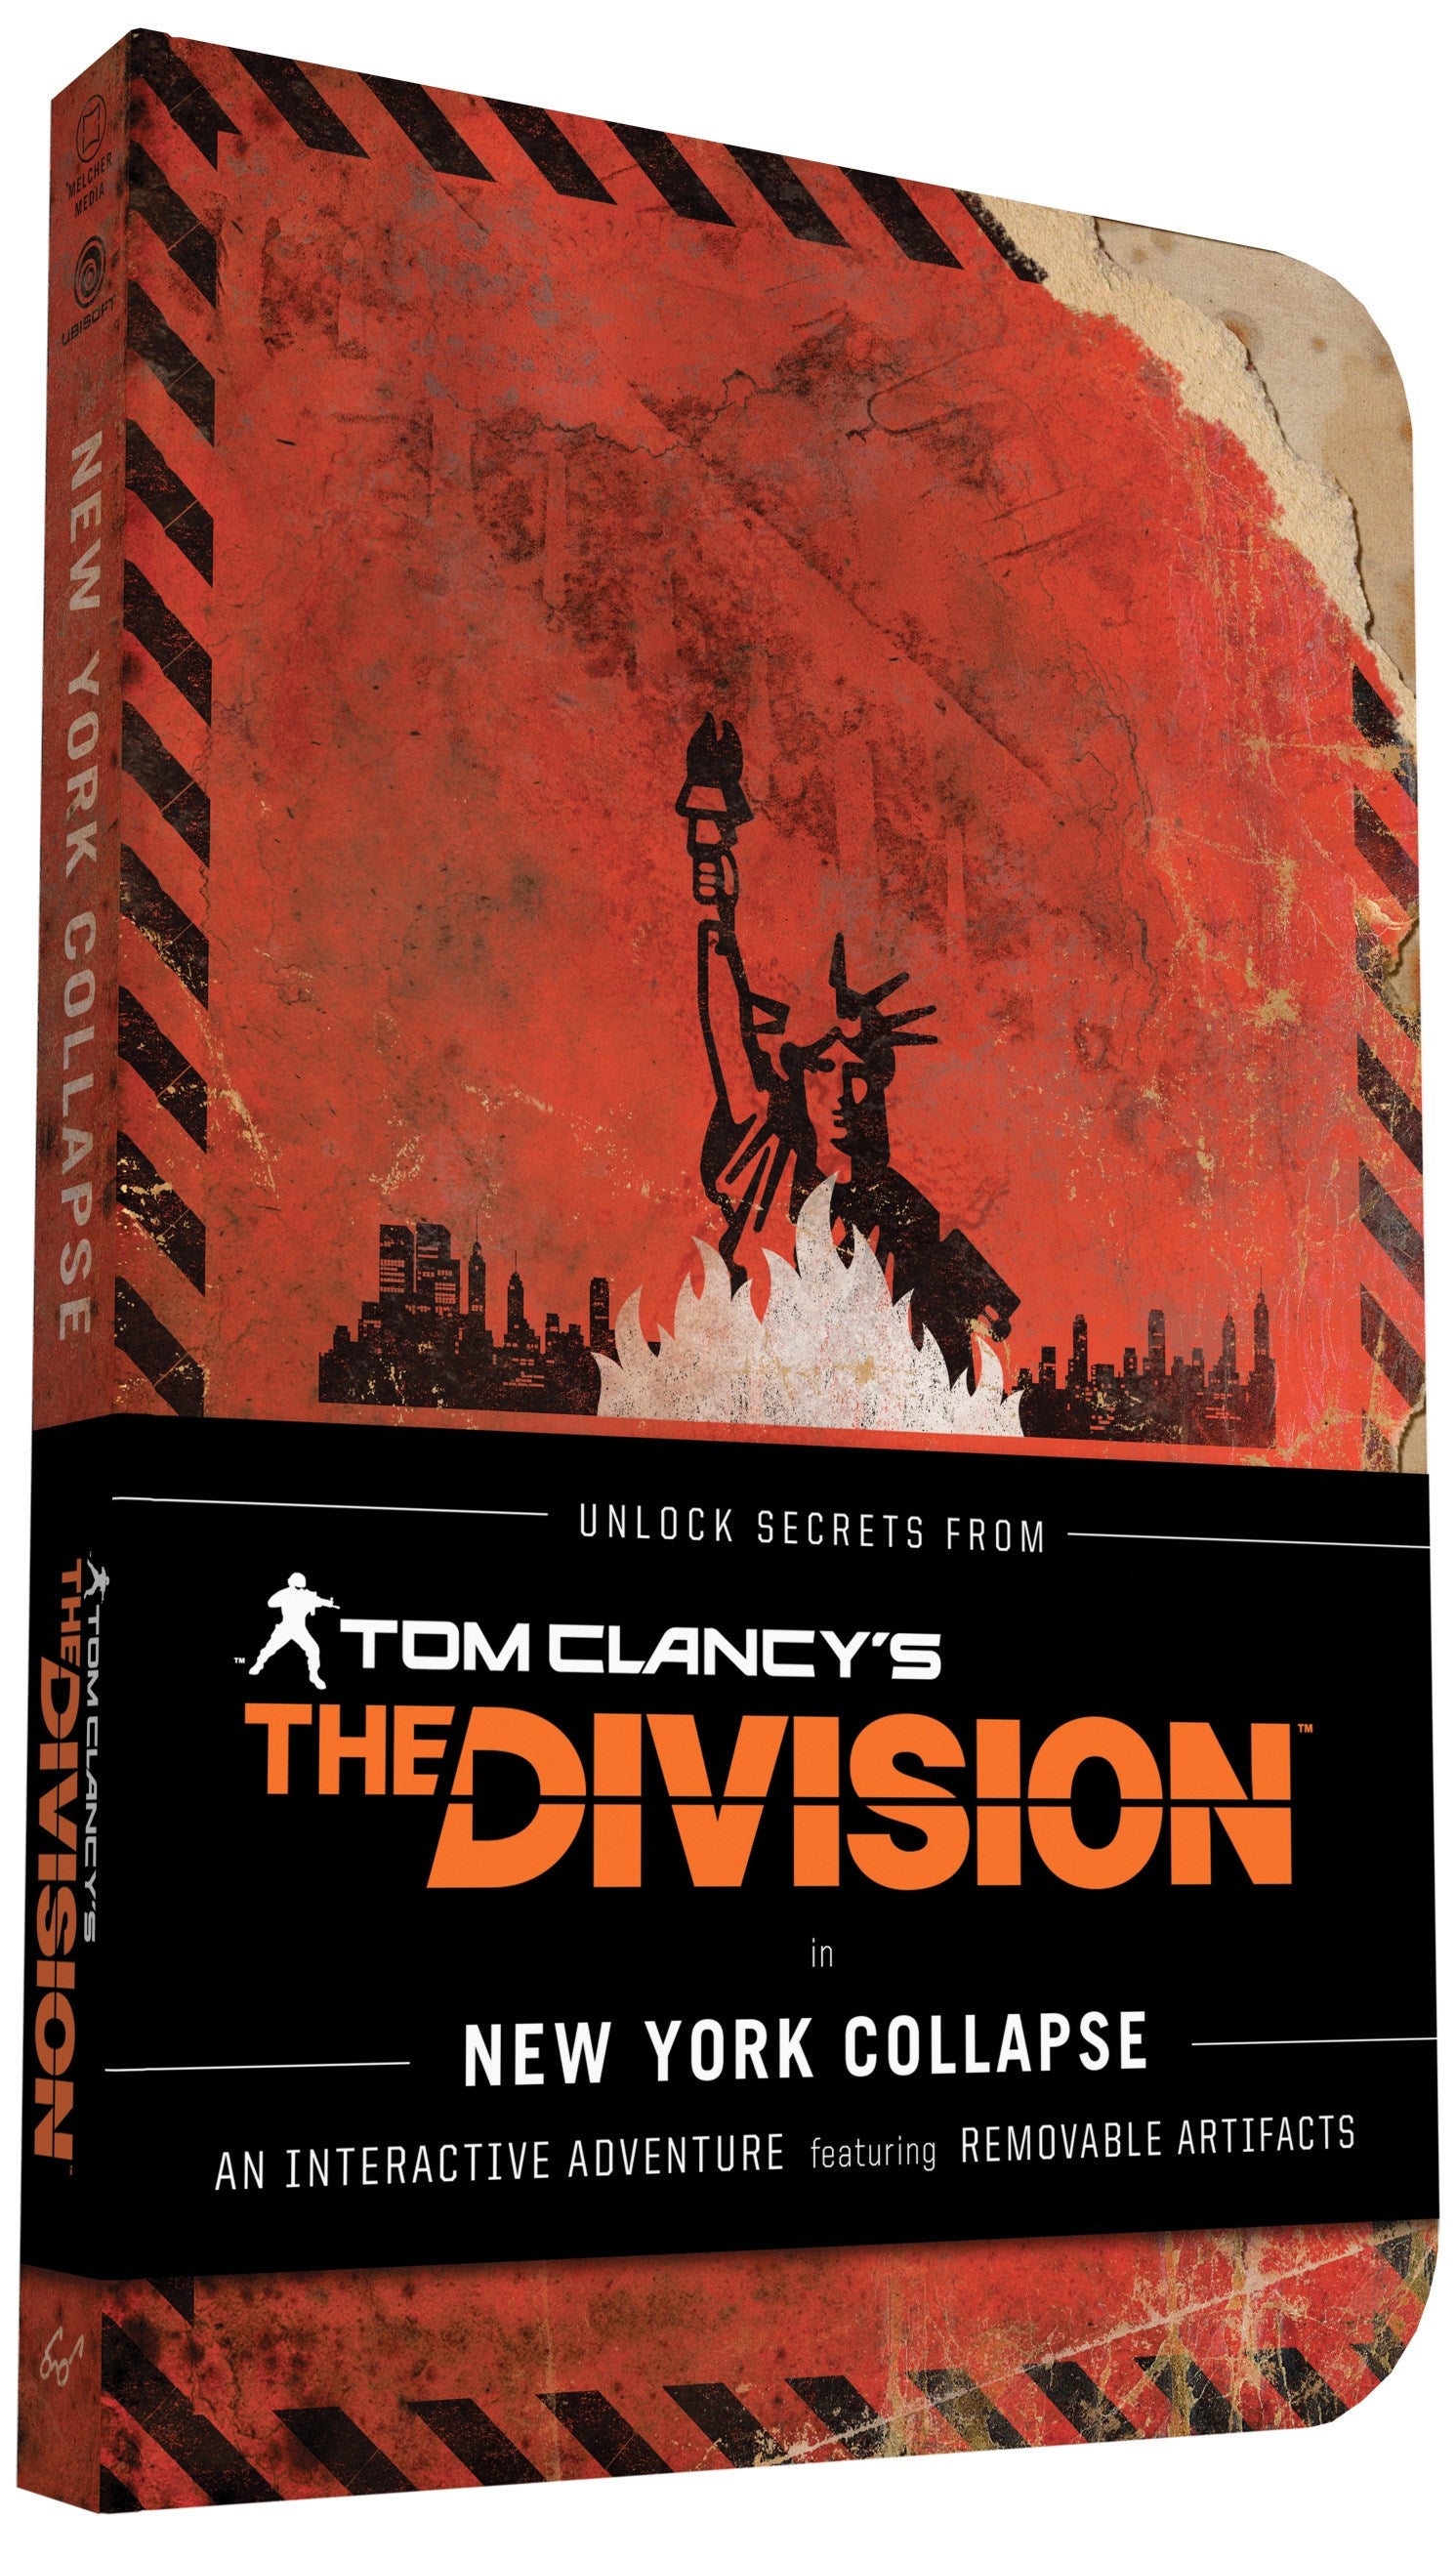 Tom Clancy's The Division: New York Collapse : (Tom Clancy Books, Books for Men, Video Game Companion Book)